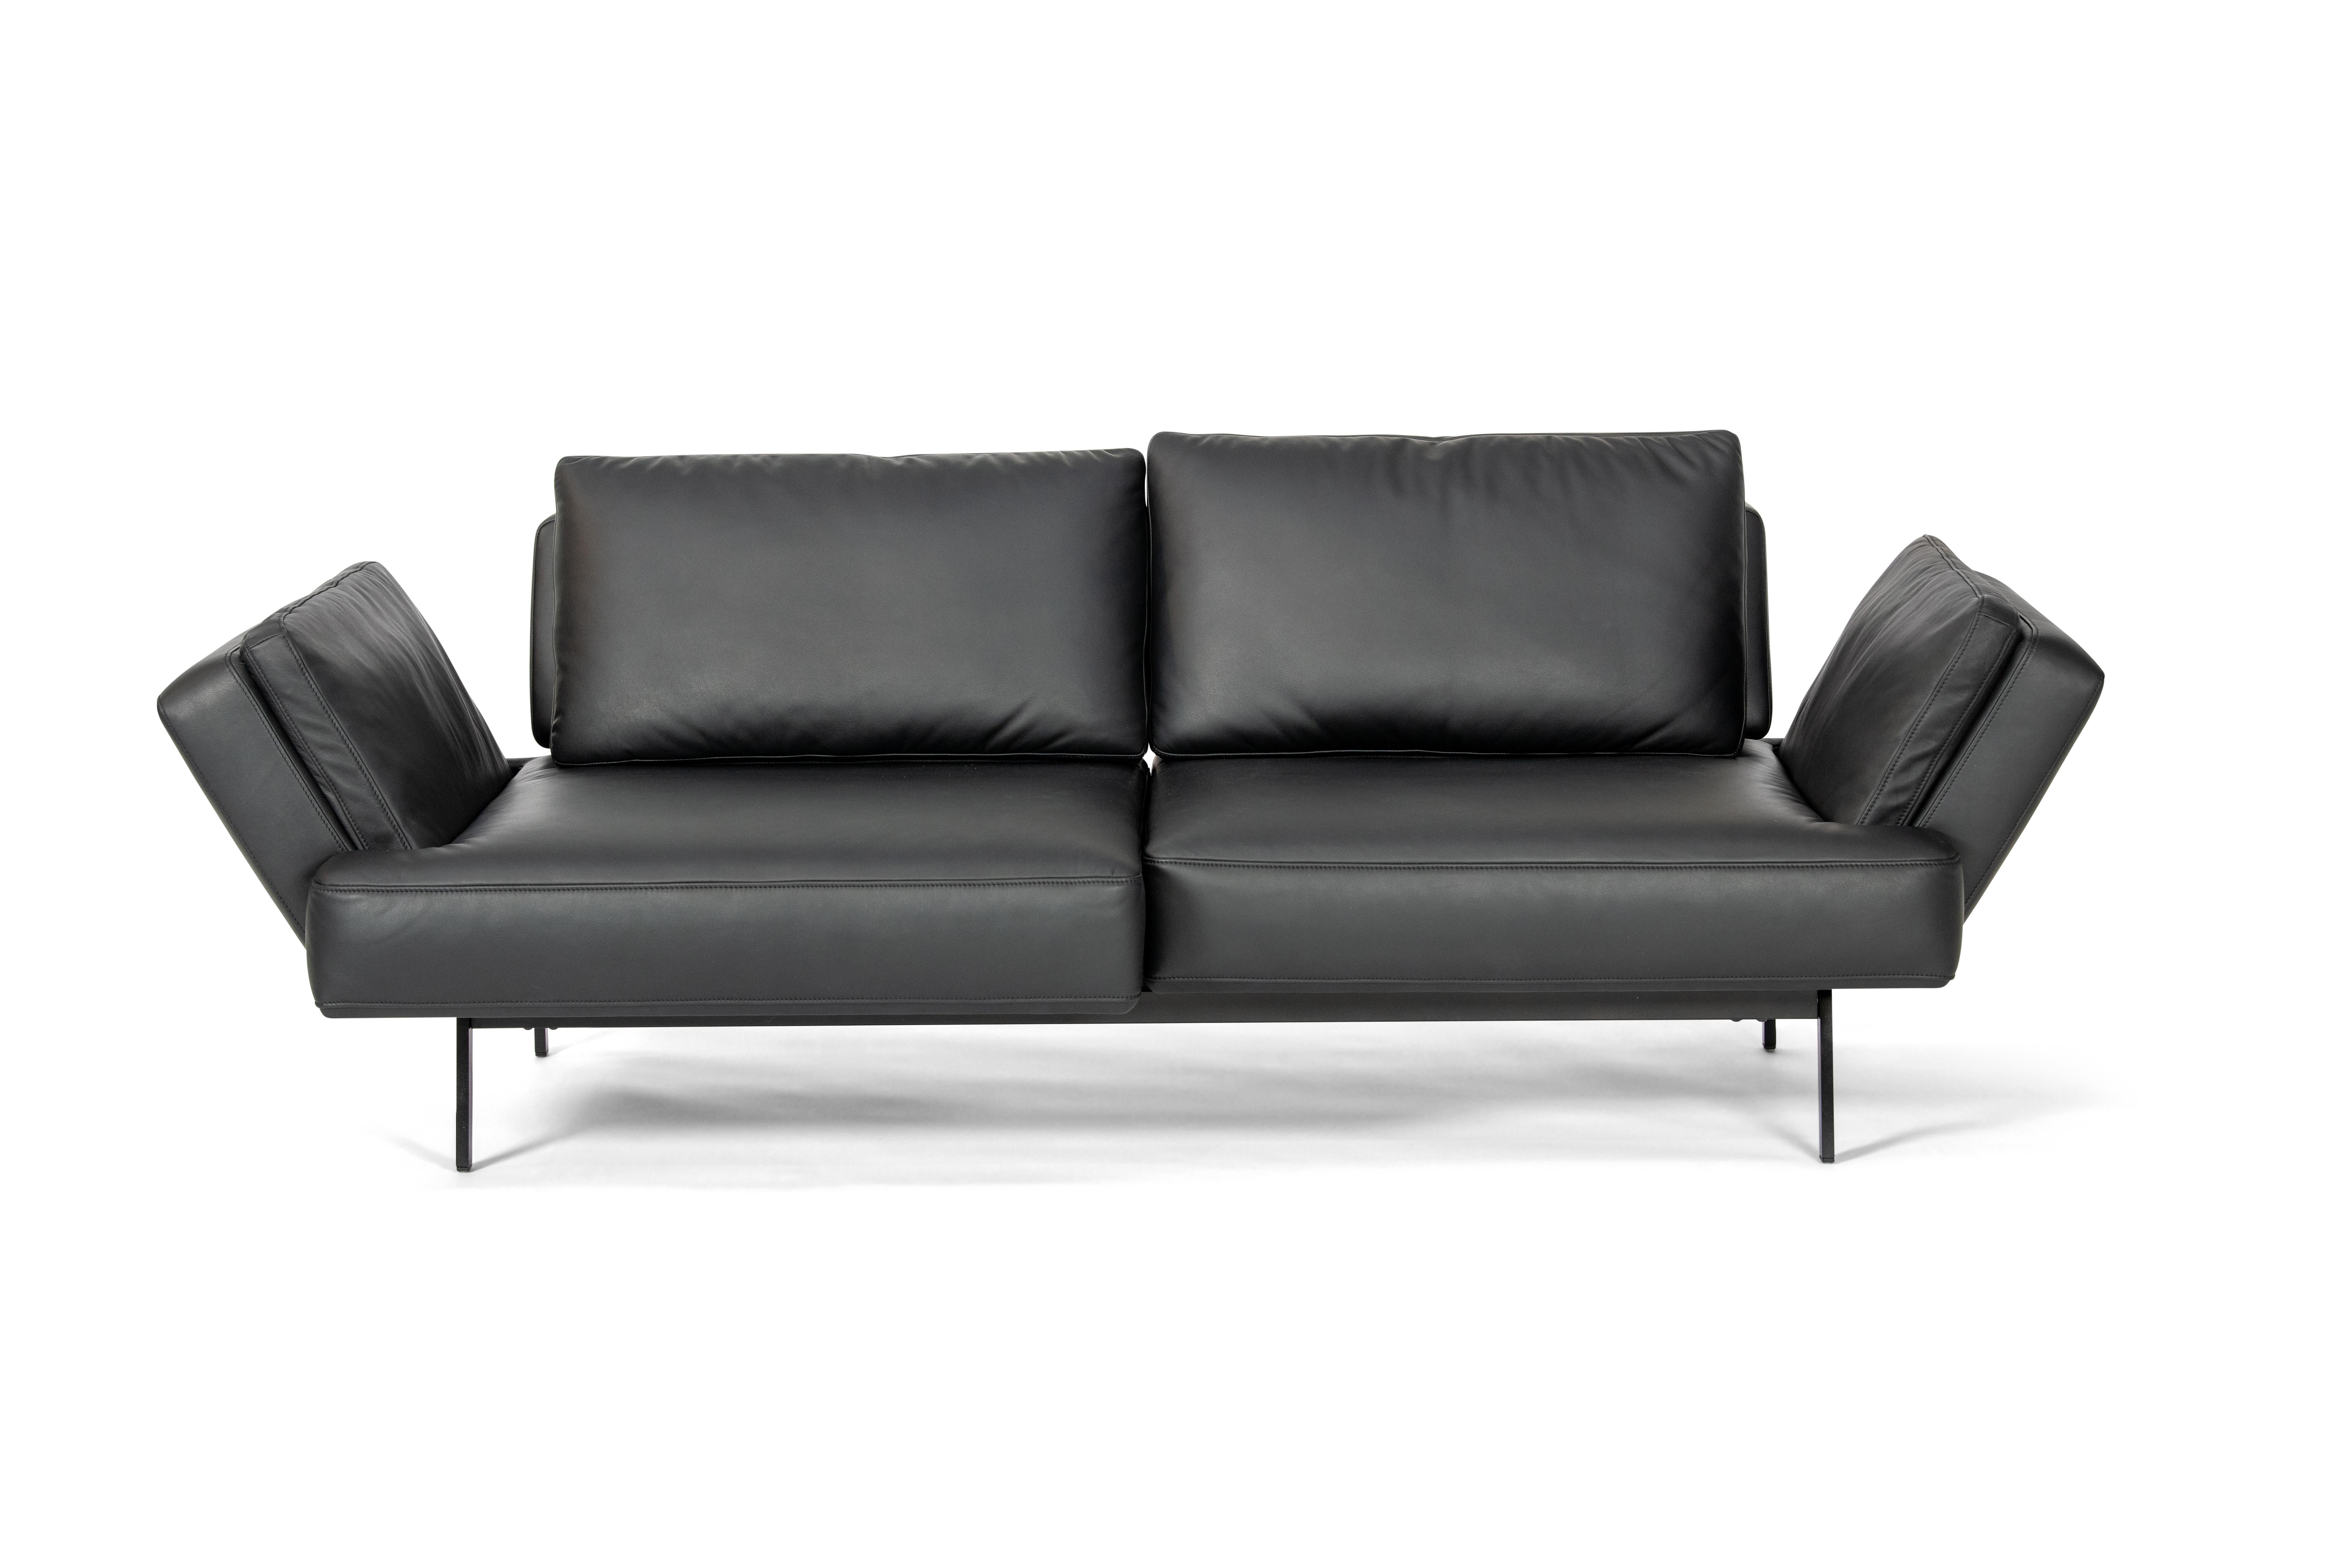 Modern DeSede Ds-747/04 Multifunctional Sofa in Black Leather Seat and Back Upholstery For Sale